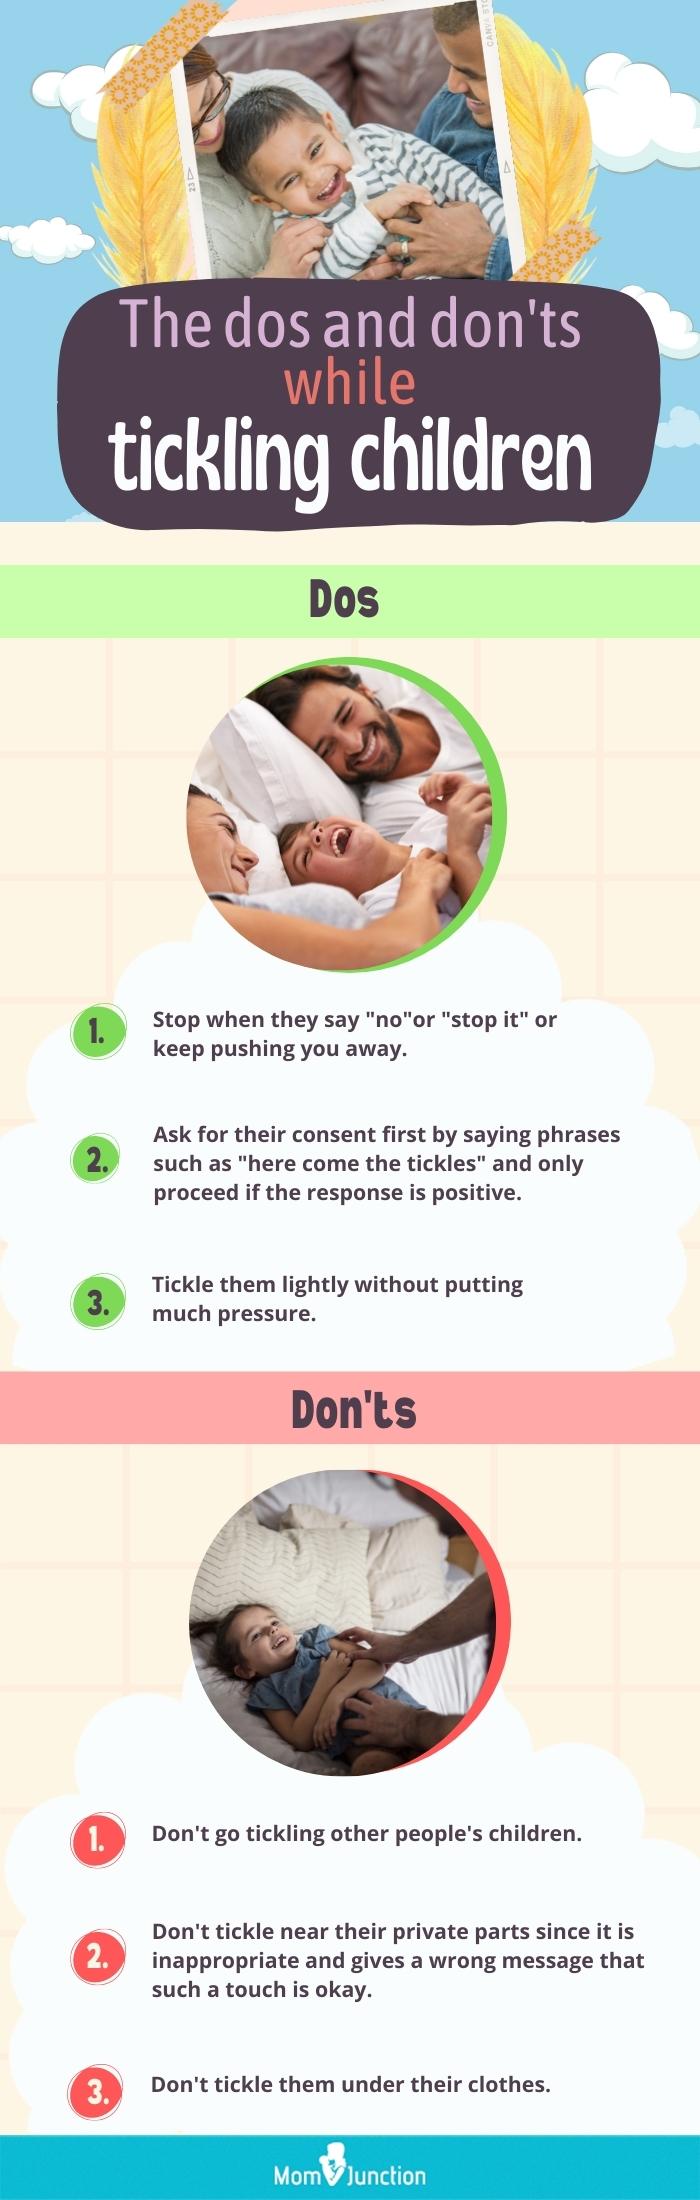 things you should know about tickling children (infographic)